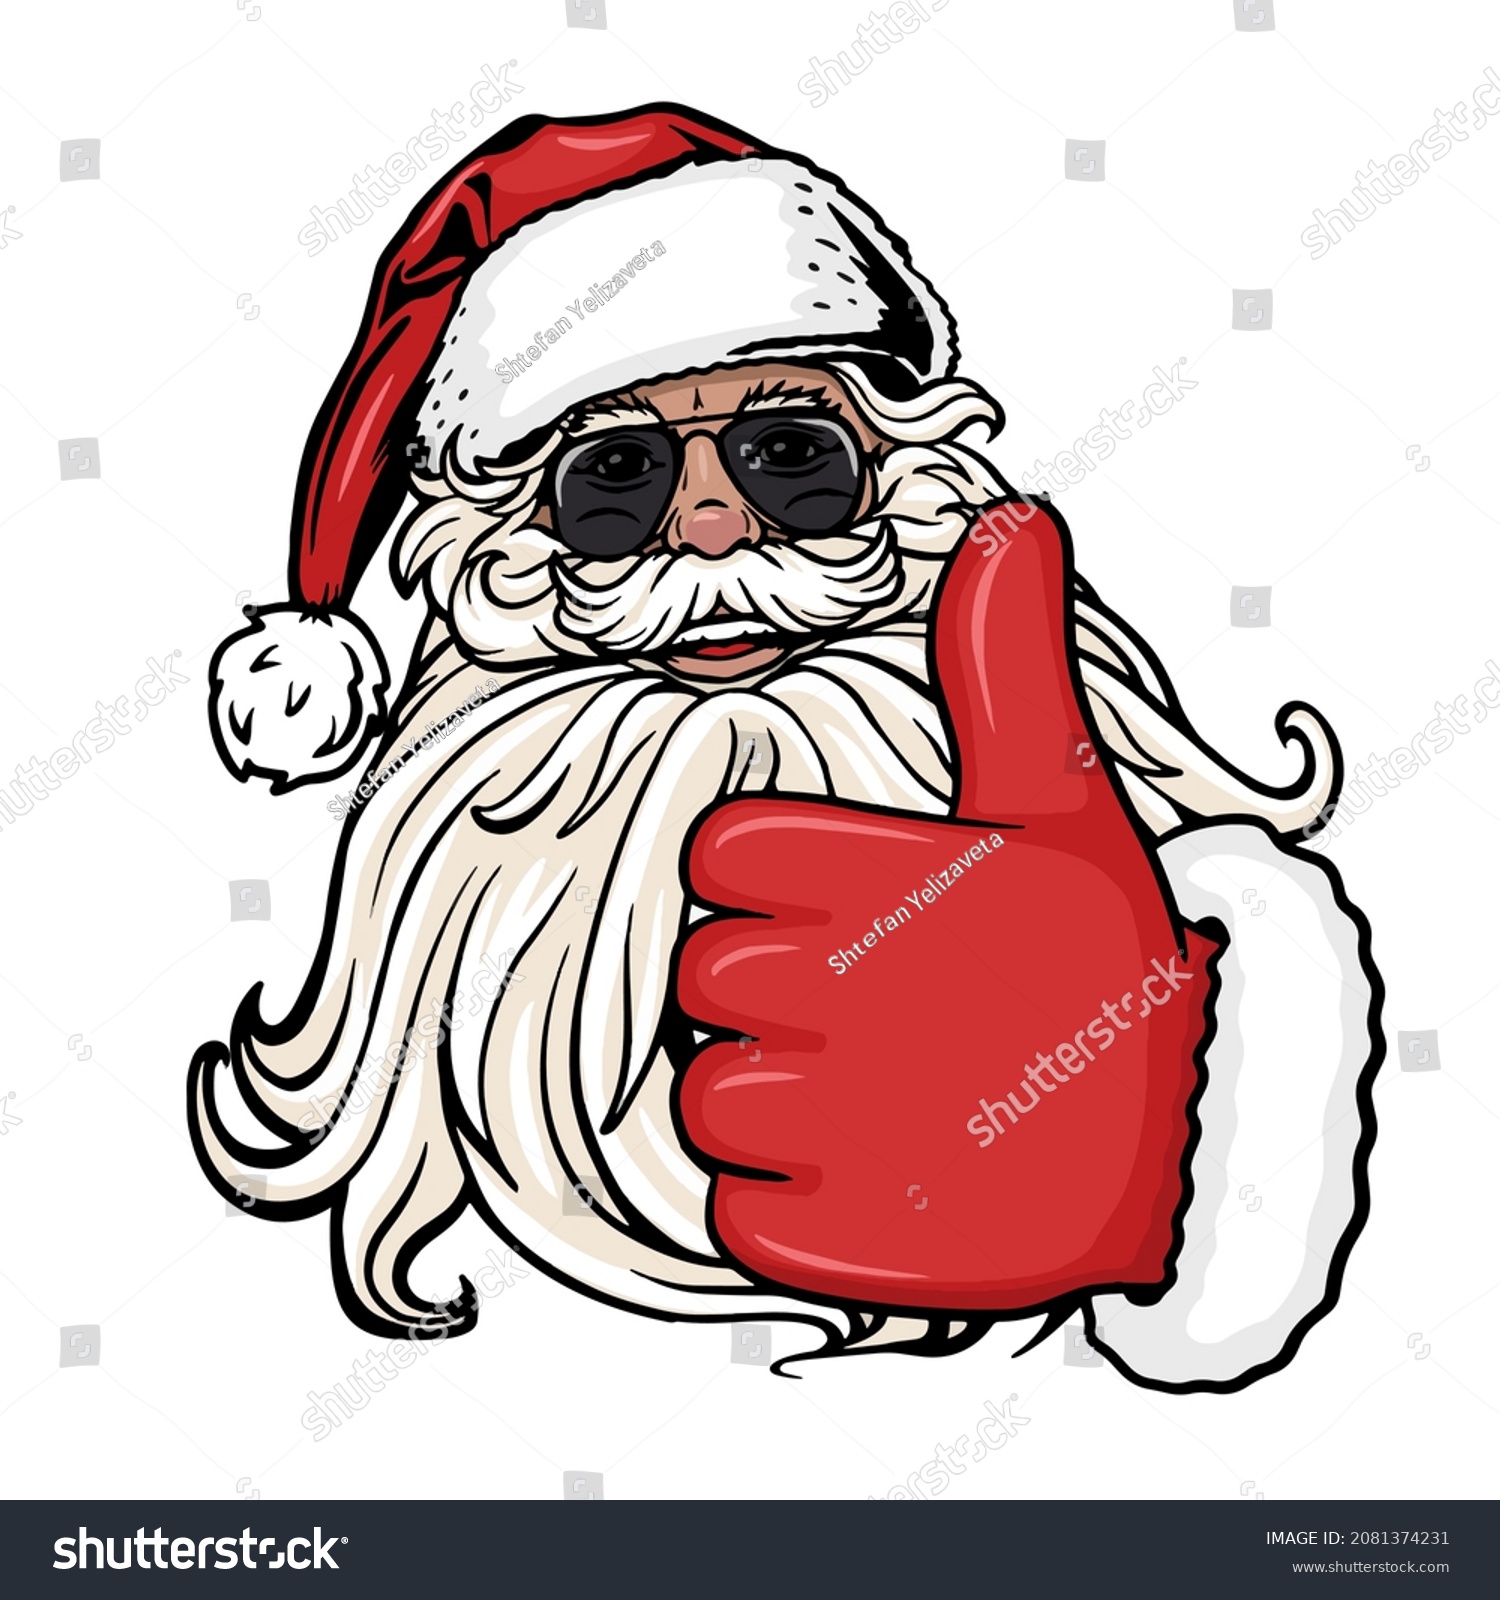 SVG of Santa Like with Sunglasses SVG,Cool Santa Santa head,Santa clipart,Santa Face svg,Santa Claus Christmas cutting and print file. Vector illustration svg